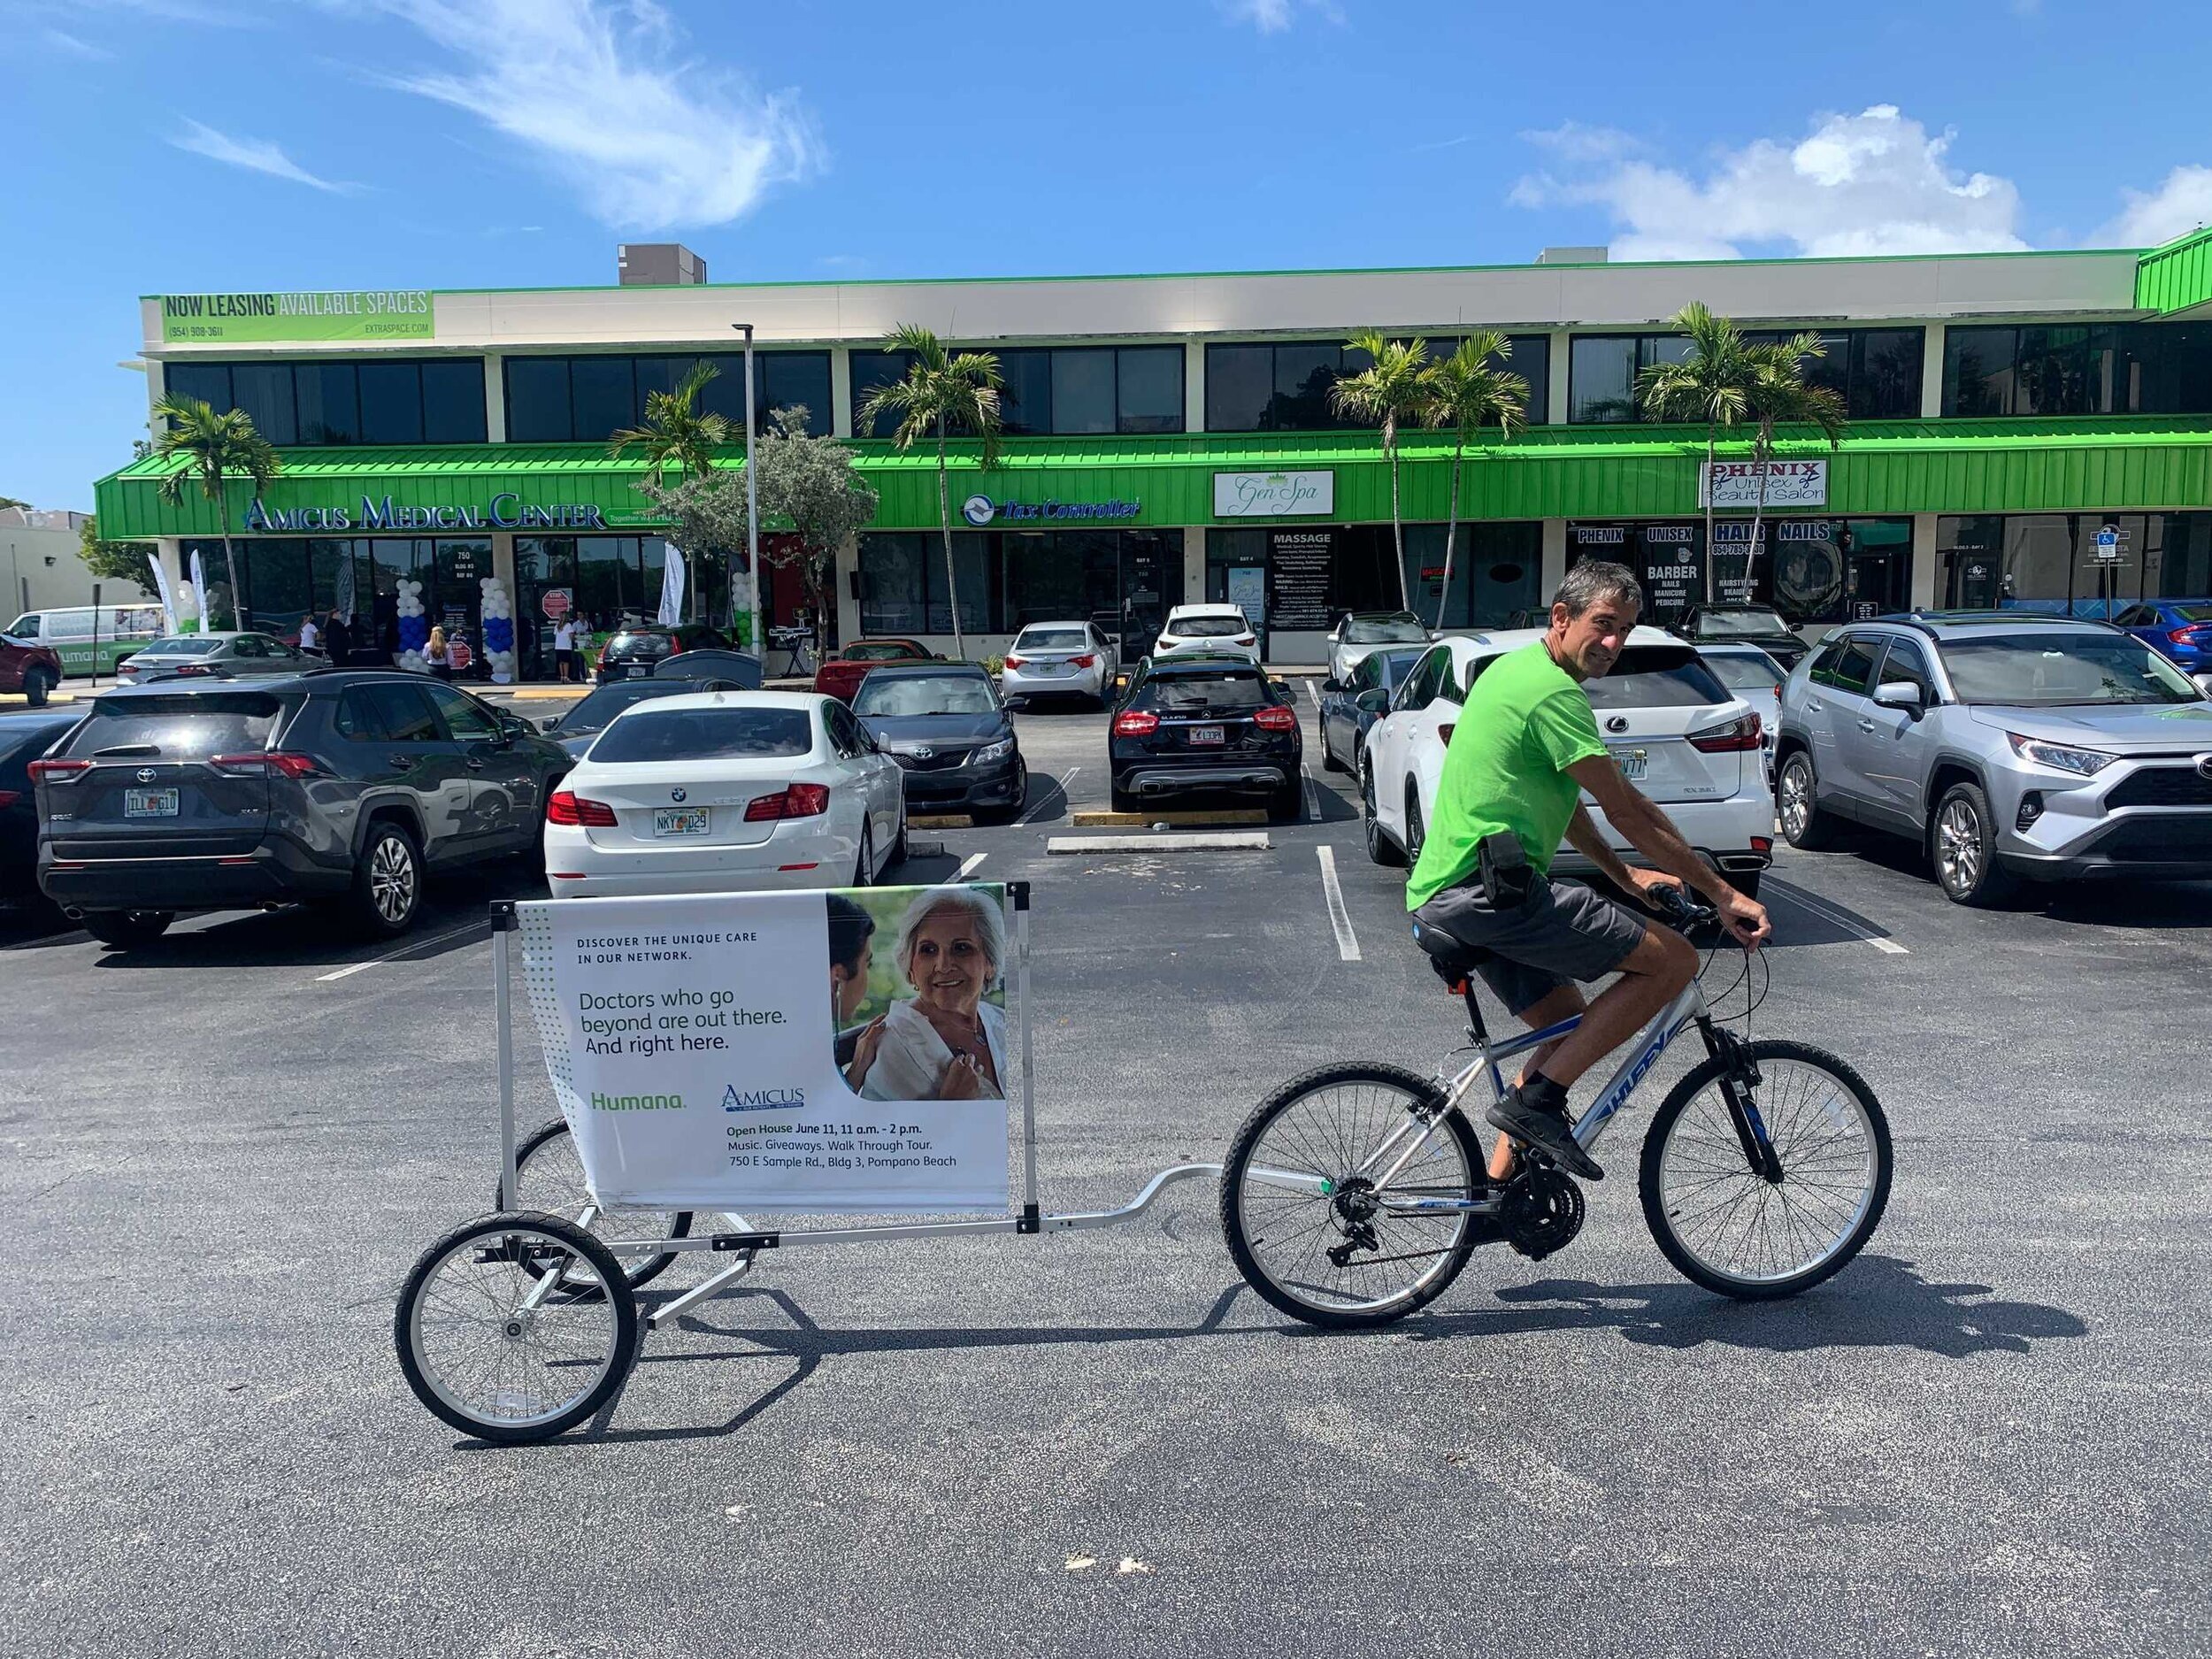 Bike billboards are great for Grand Openings